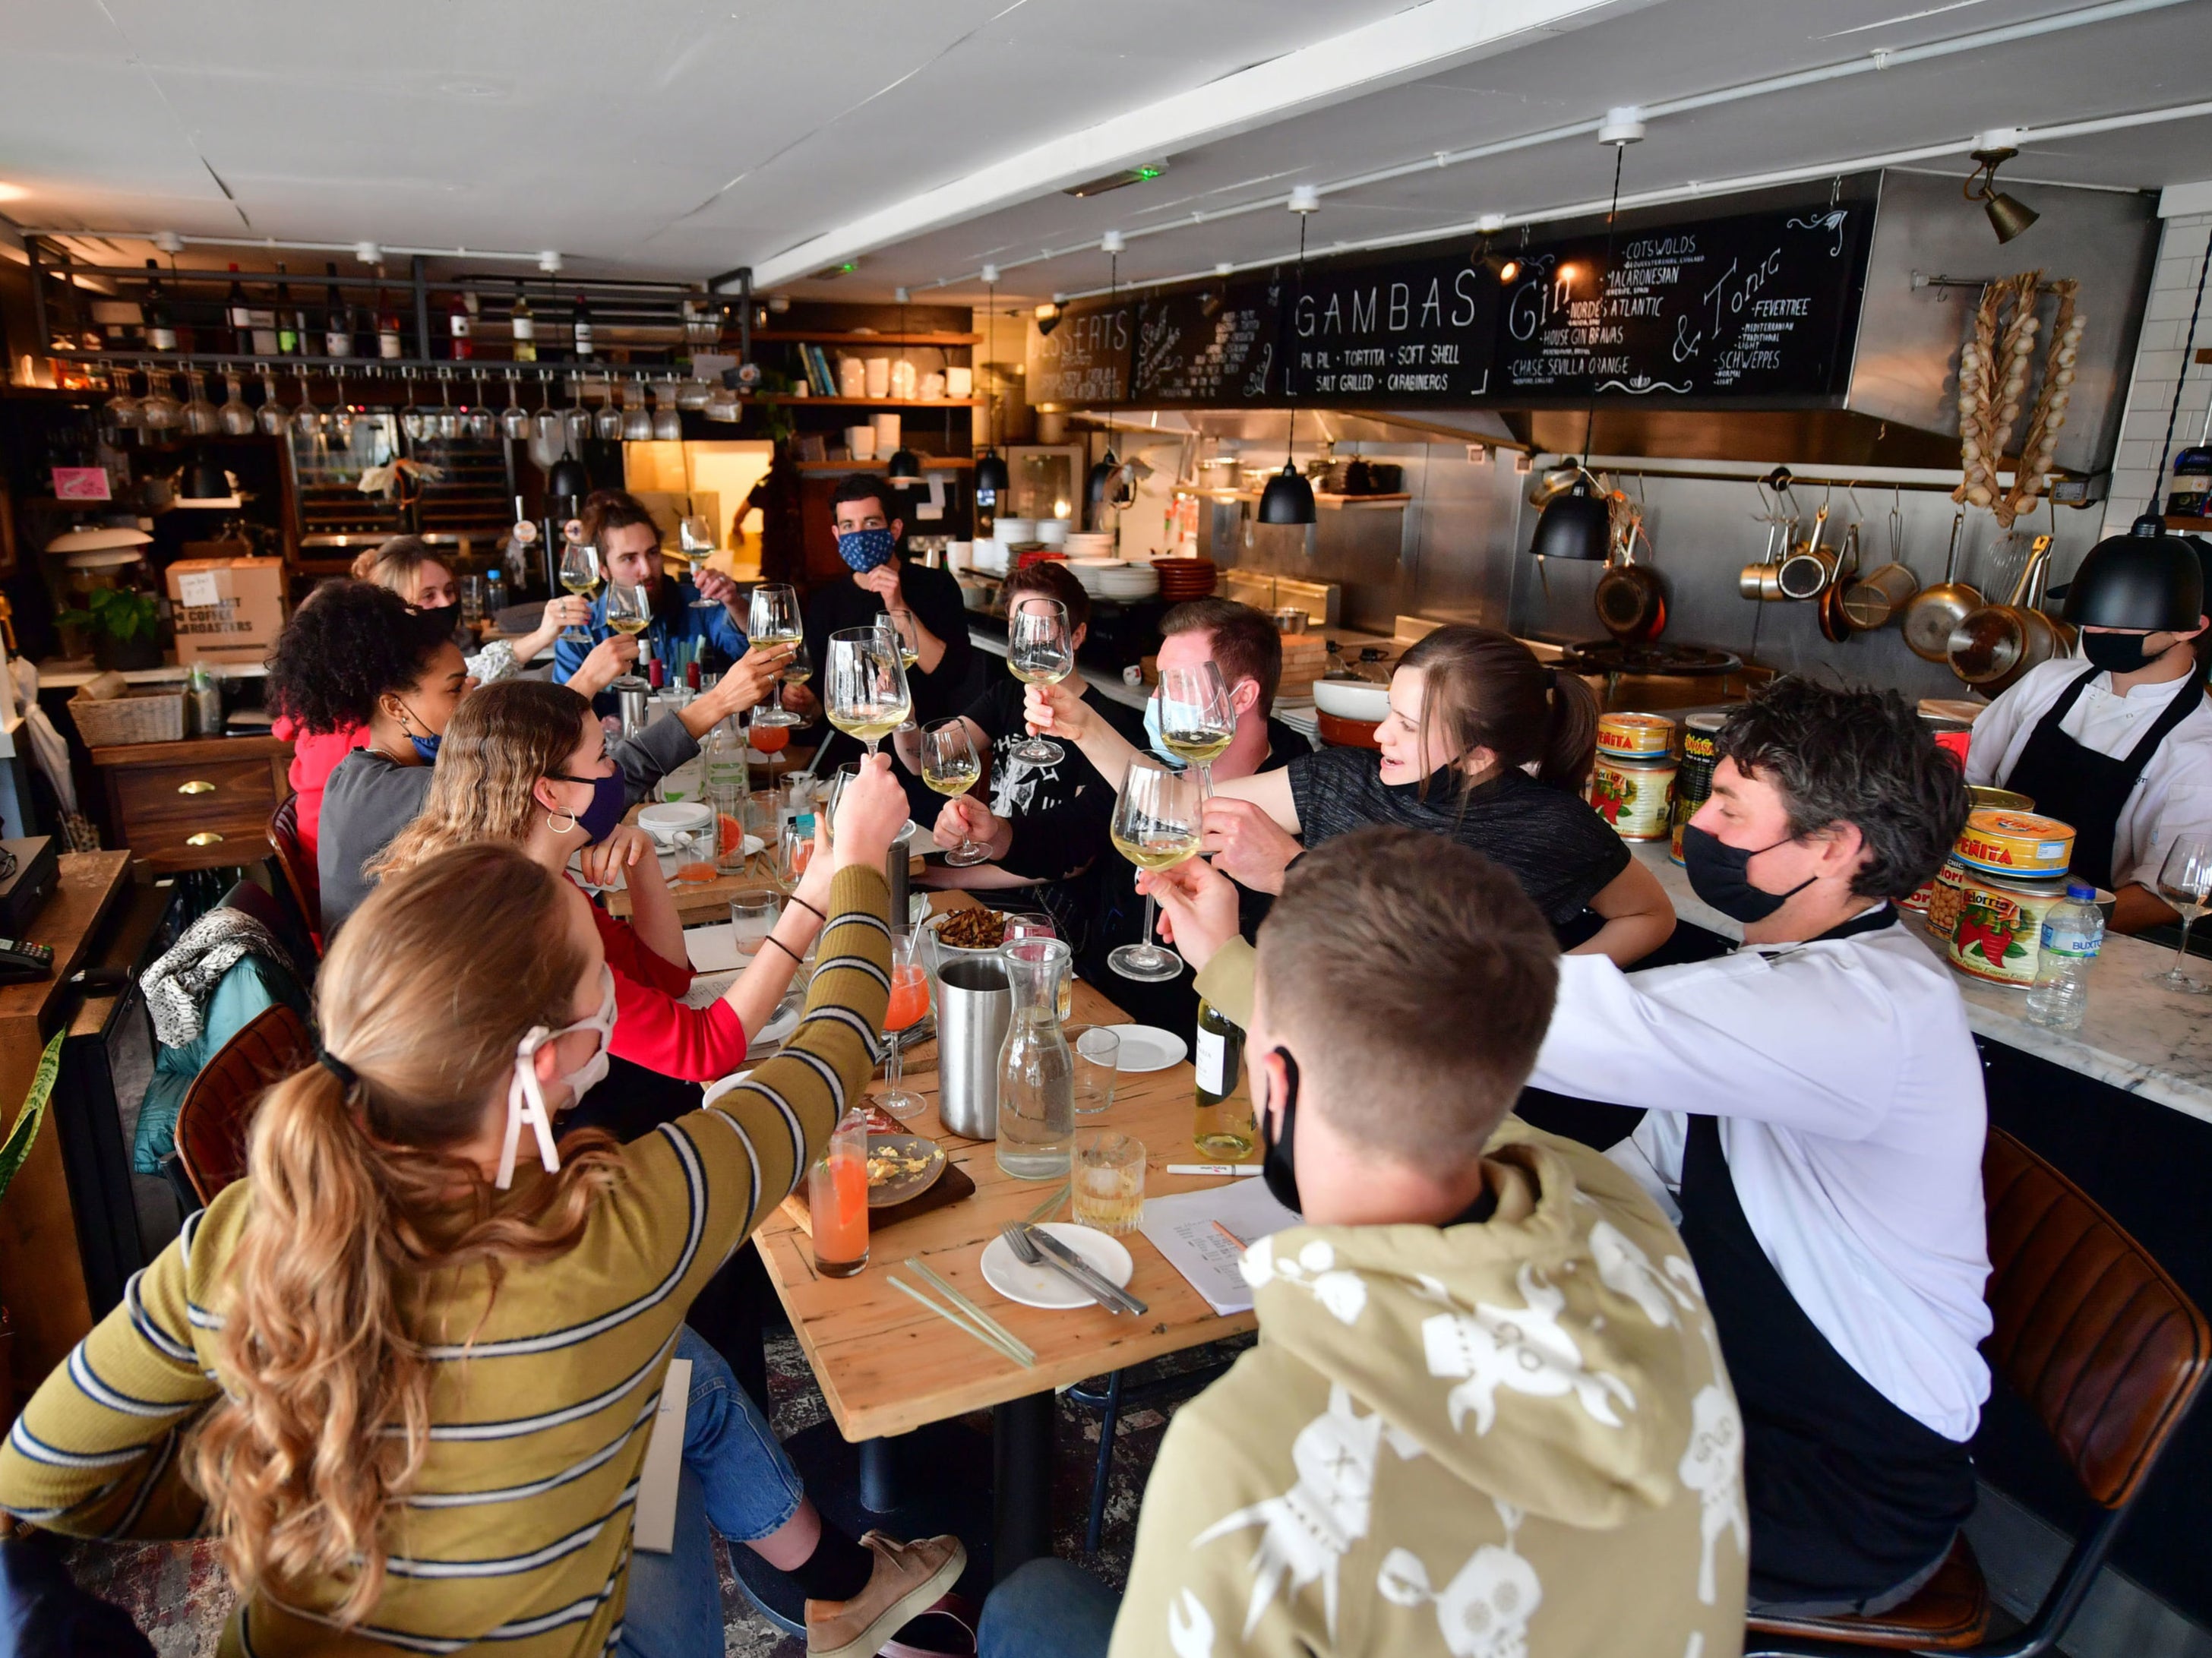 Members of staff take part in a menu tasting at Gambas Tapas Bar in Wapping Wharf, Bristol, as they prepare to reopen for outdoor dining on 12 April when further lockdown restrictions are eased in England